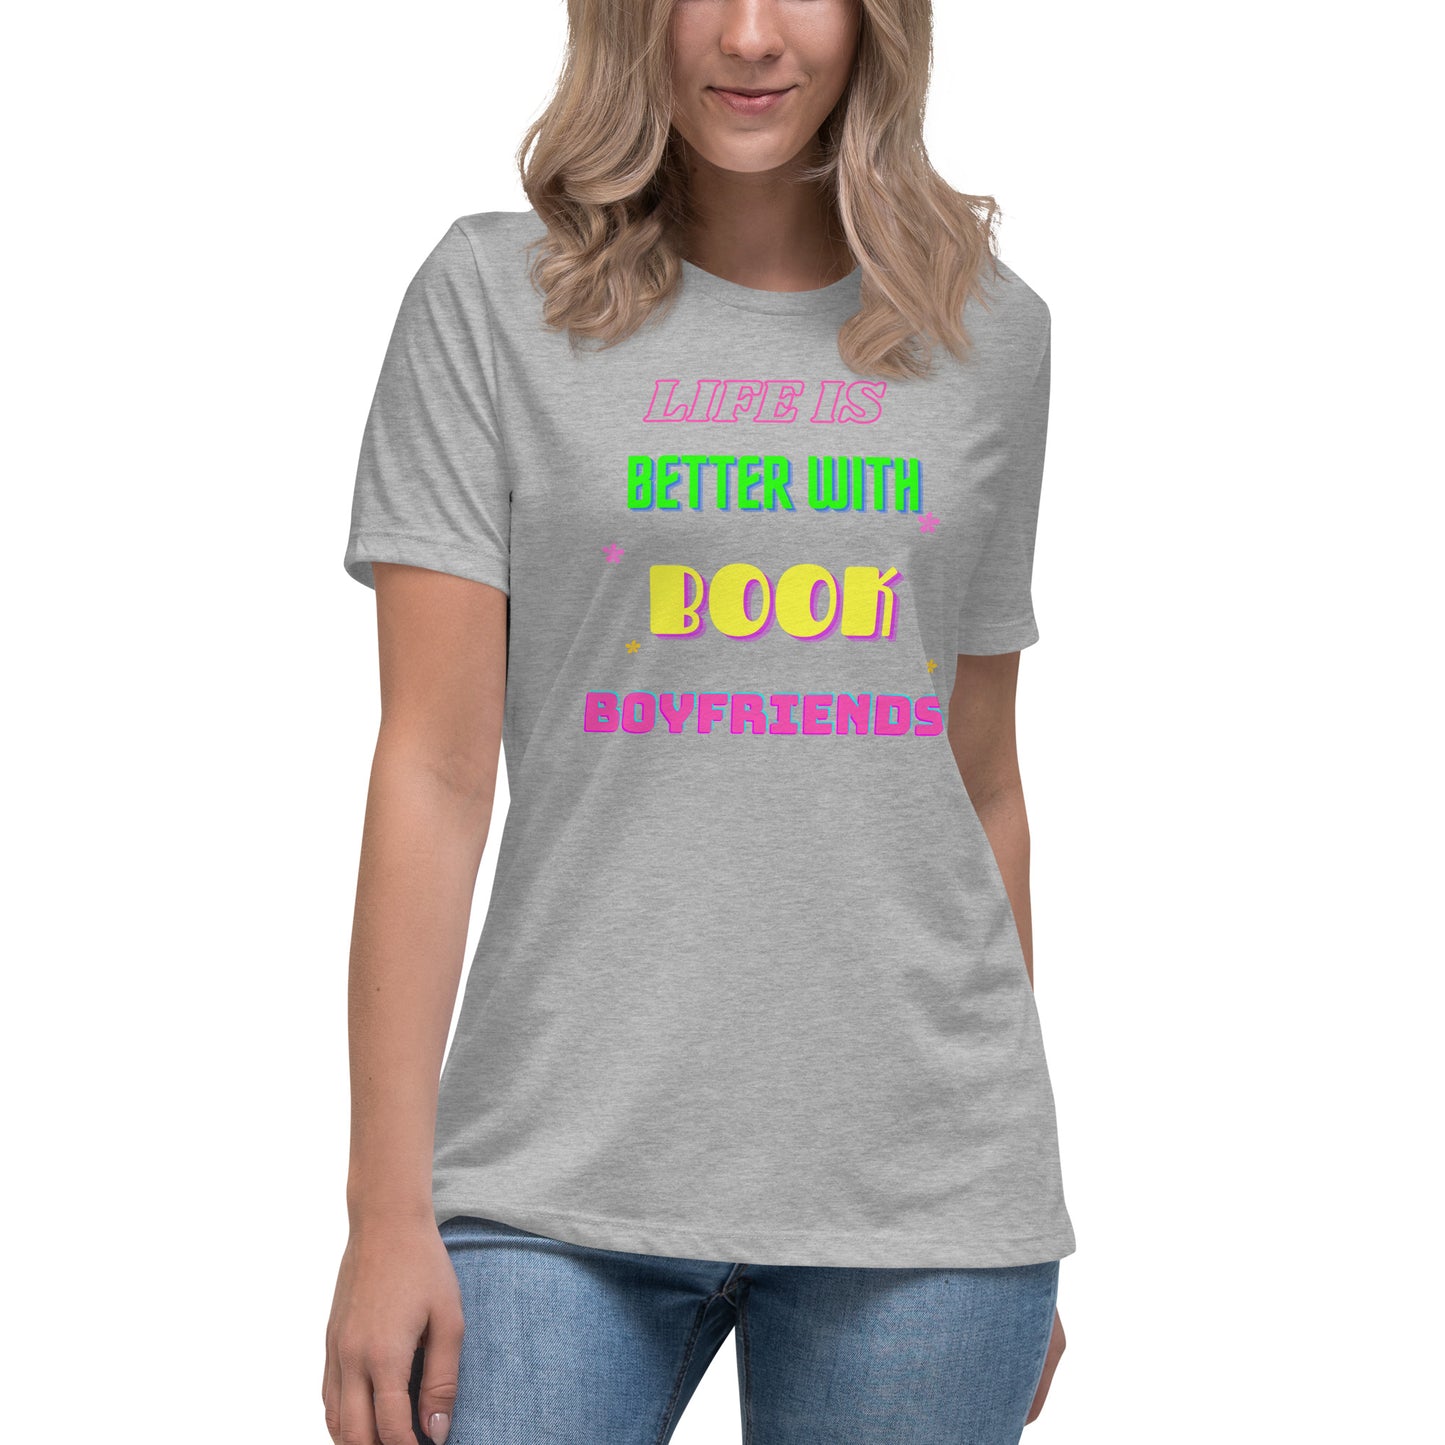 Women's Relaxed T-Shirt Life is better with book boyfriends